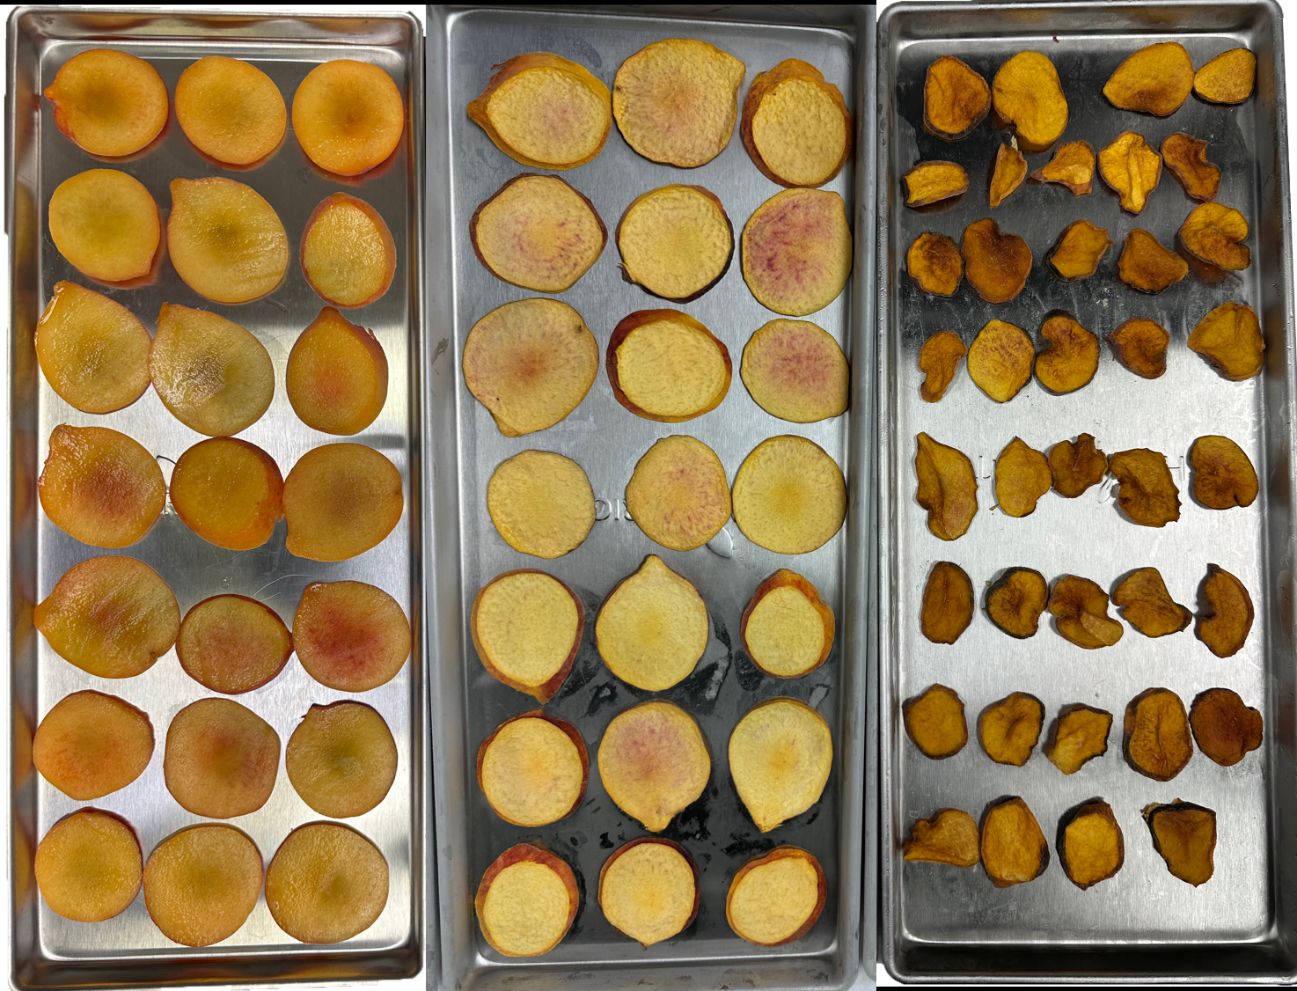 Comparison of visual differences between fresh (left), freeze-dried (middle) and dehydrated (right) ‘UFOne’ peach slices.